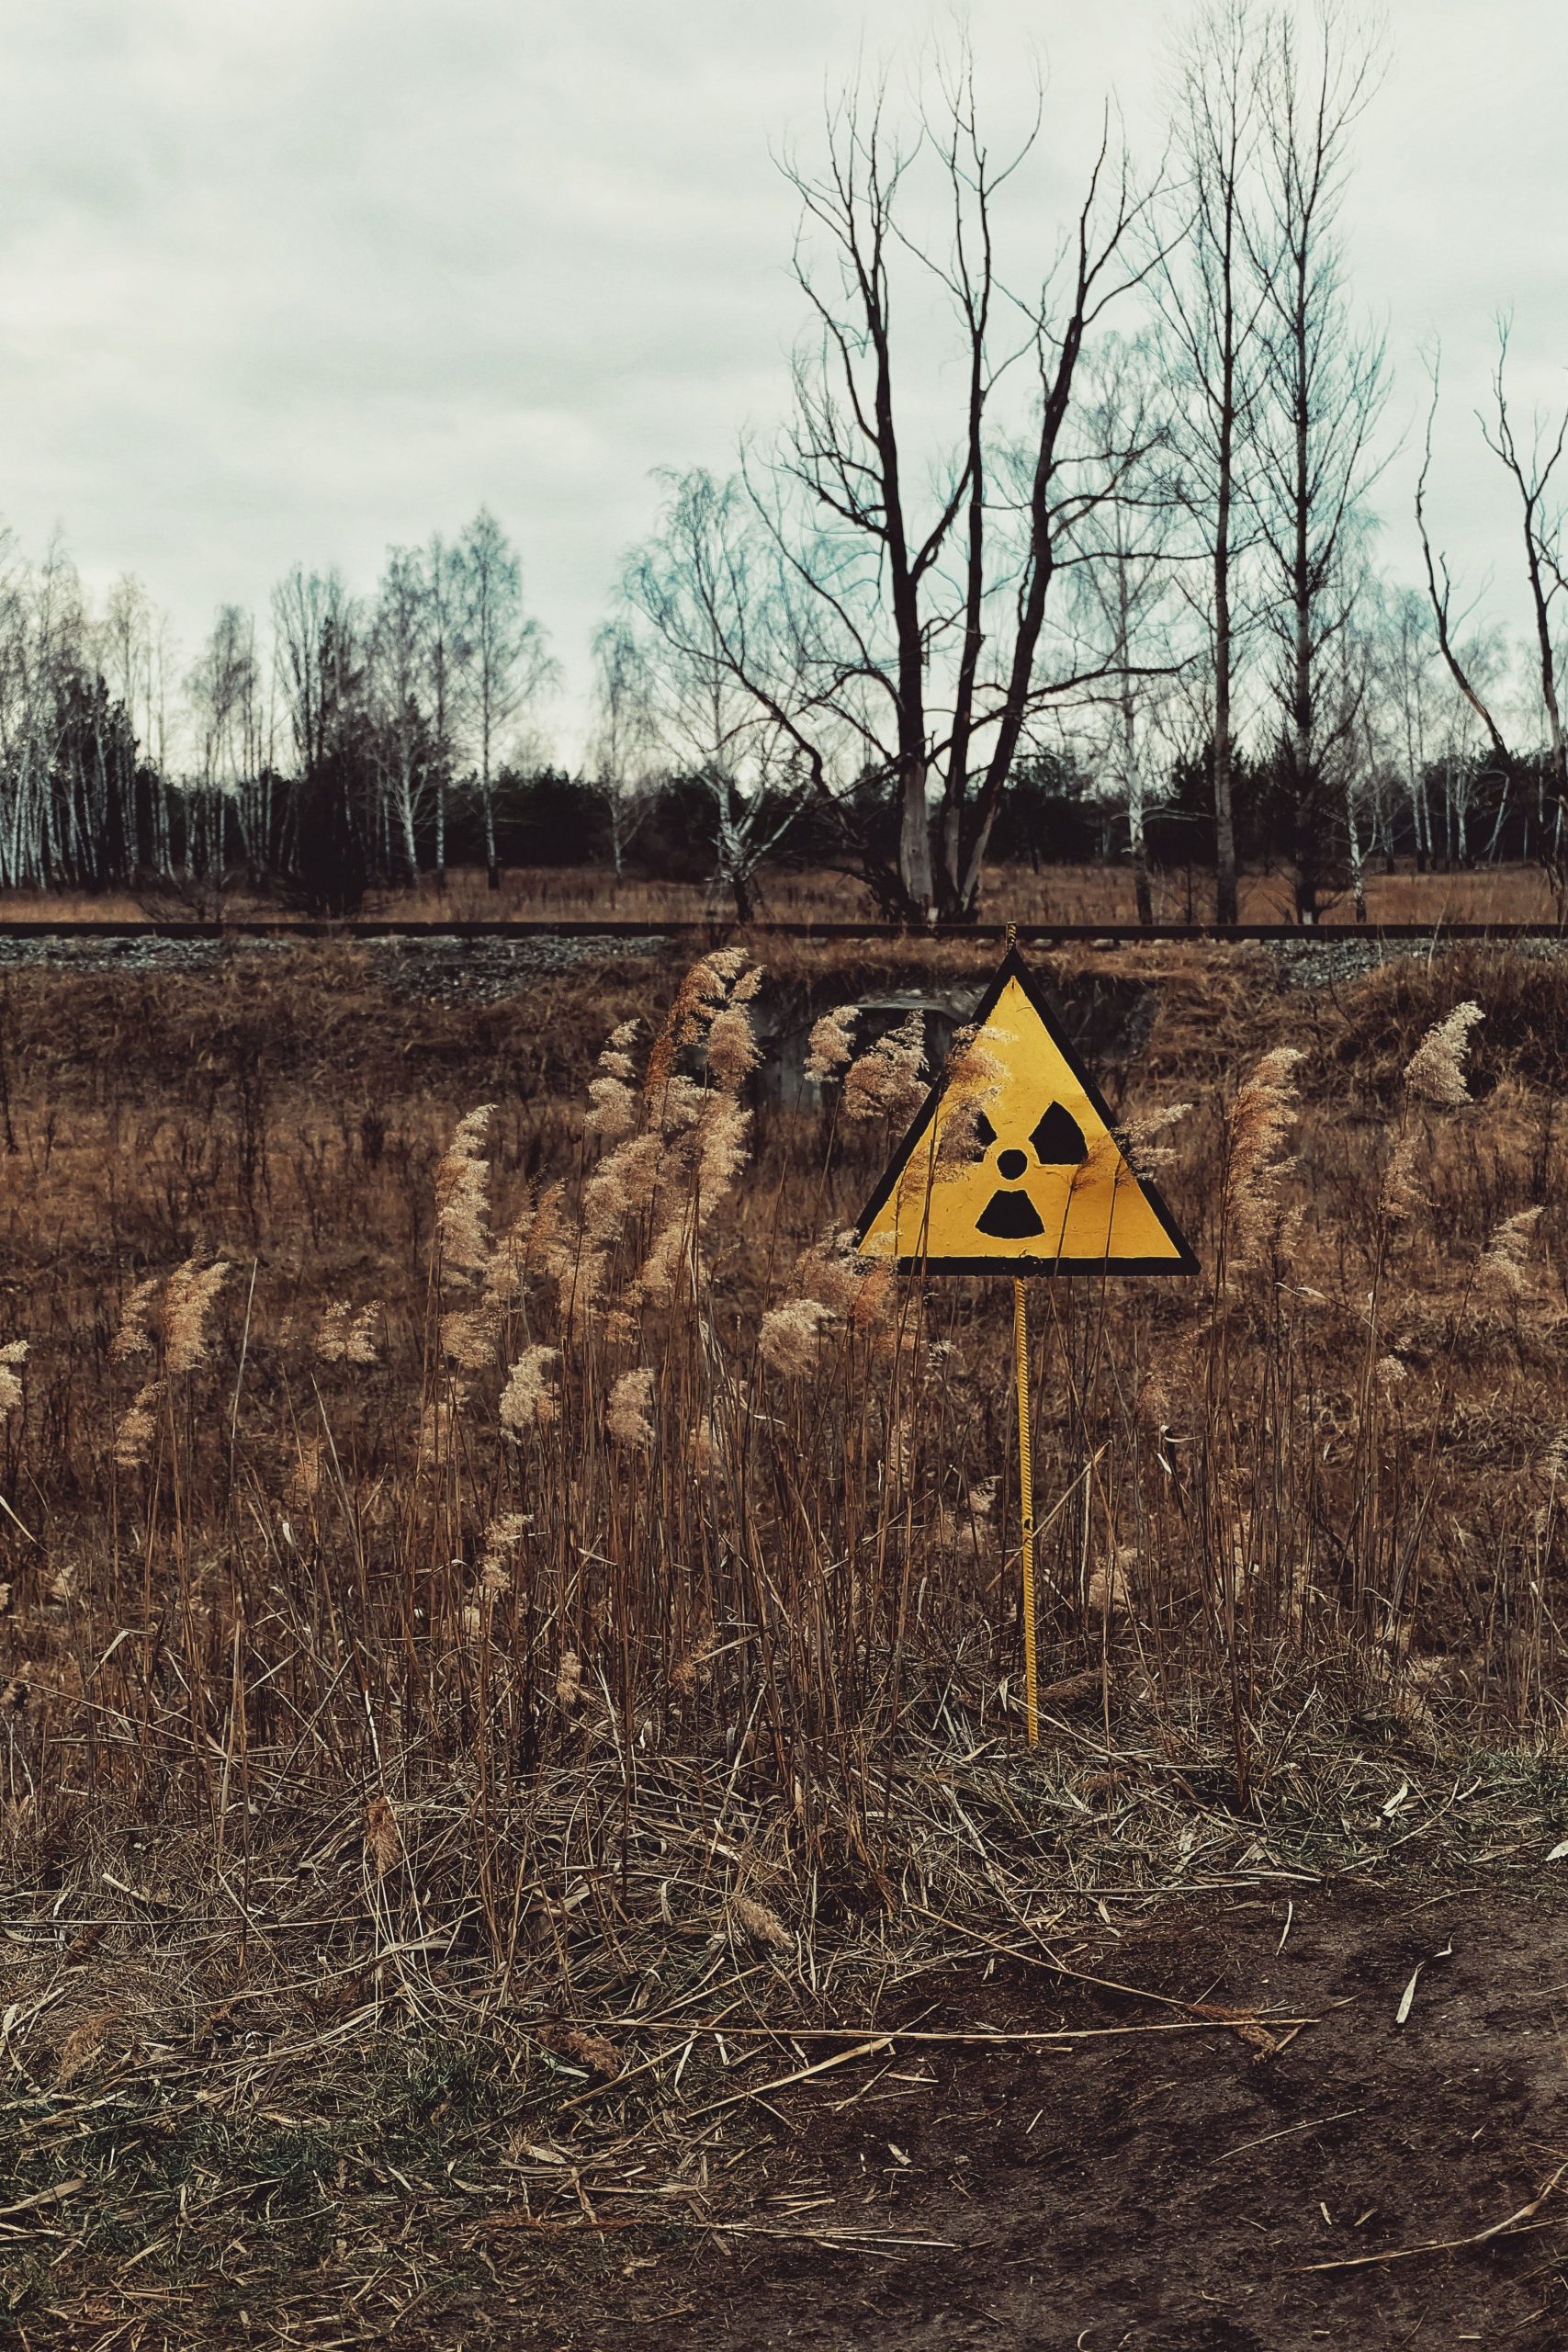 Ukraine has lost control of Chernobyl nuclear site: Presidential adviser